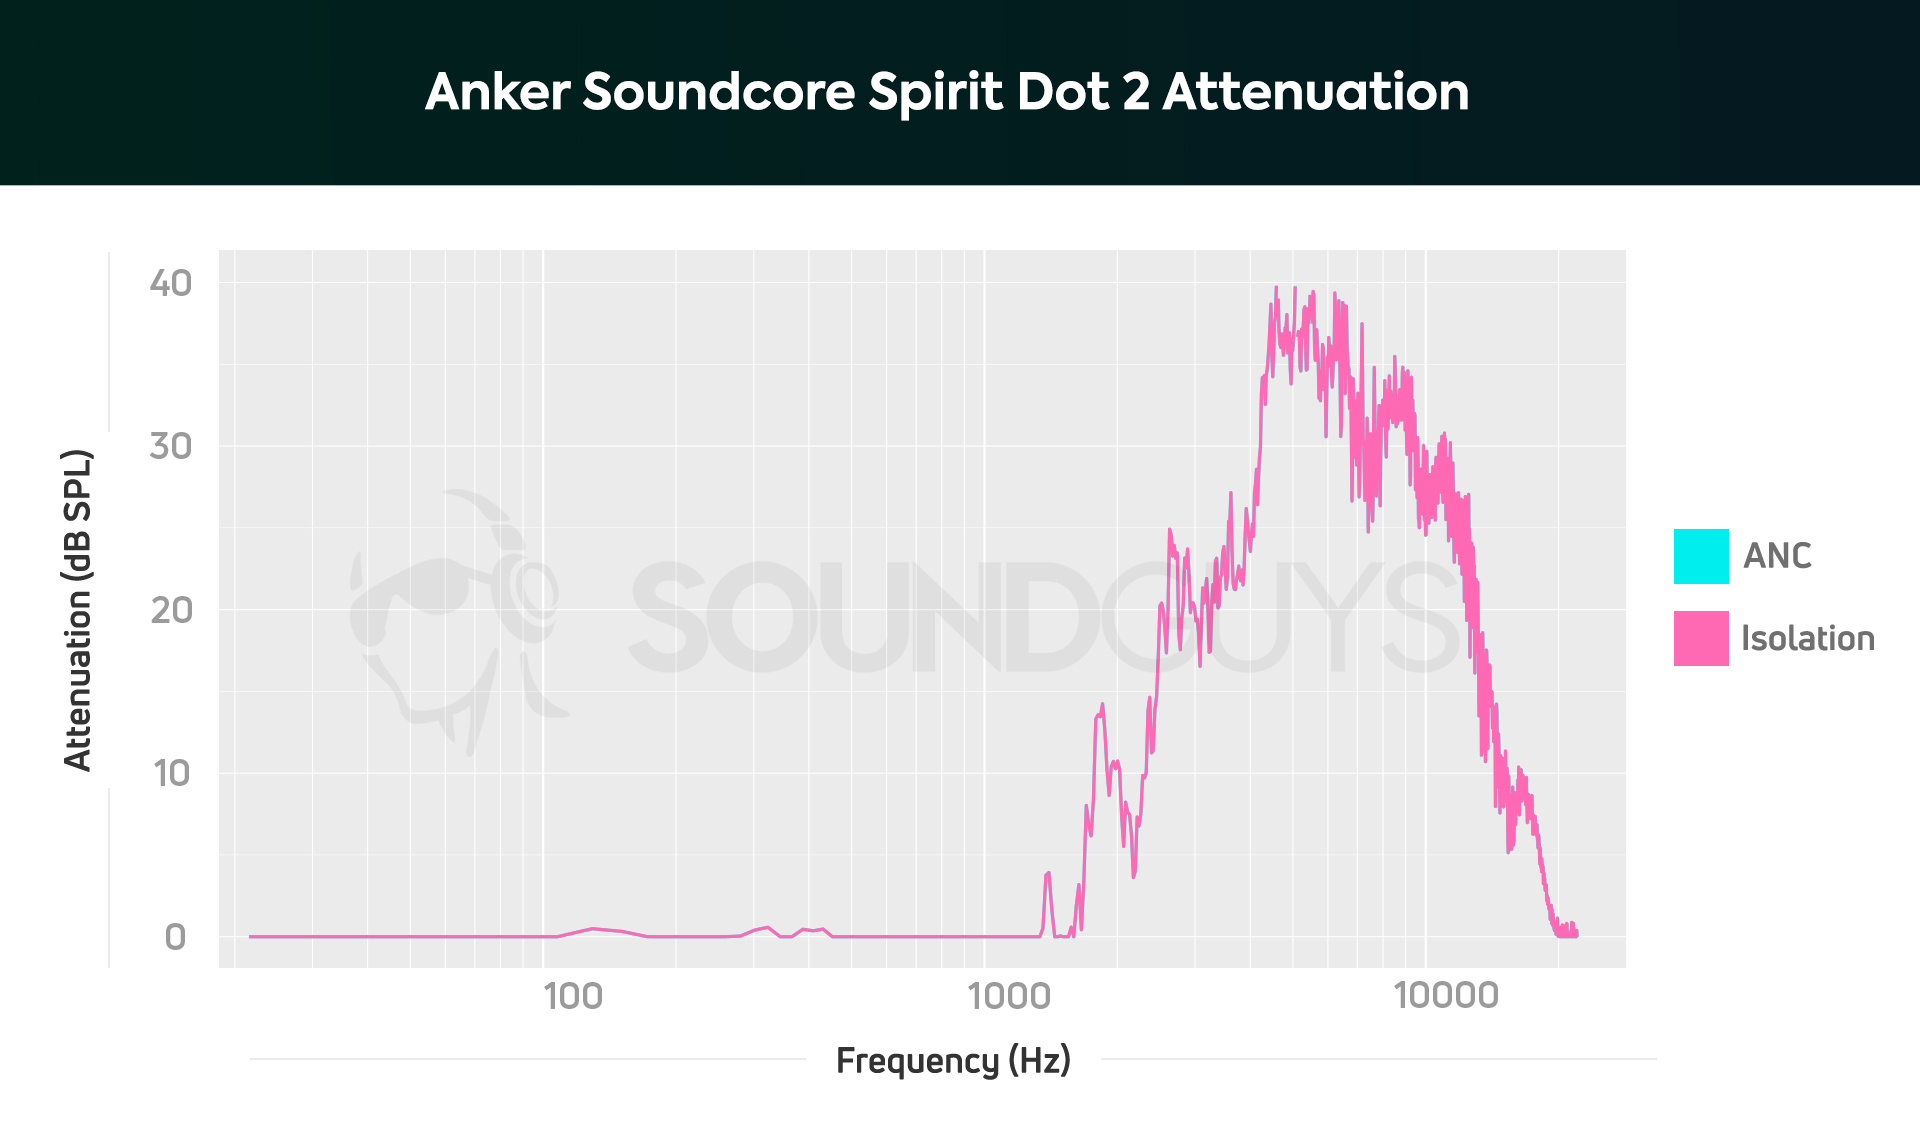 Anker Soundcore Spirit Dot 2 isolation doesn't block out anything below 1000Hz